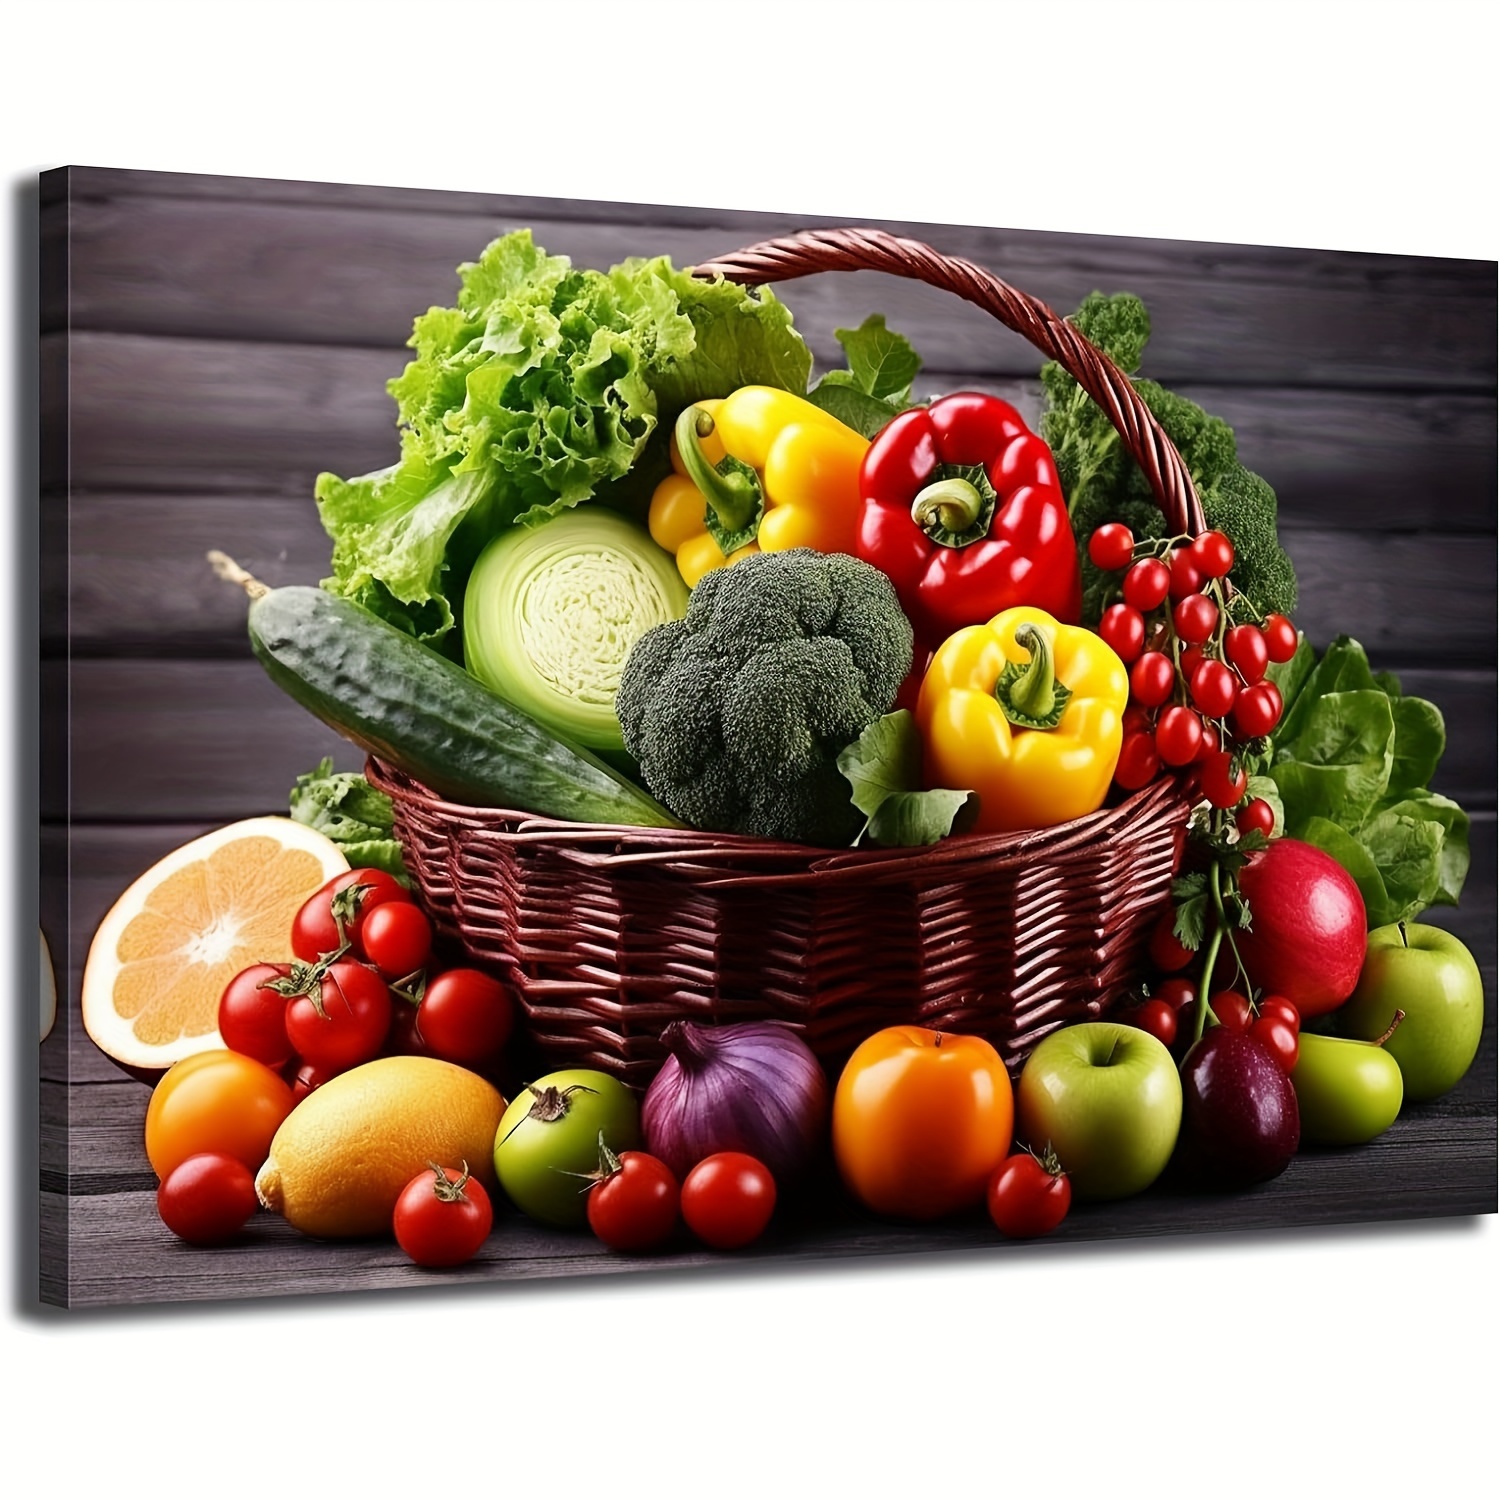 

1pc, Vegetables Kitchen Canvas Wall Art Picture Print Basket's Fresh Fruit Poster Frame Vintage Food Picture Canvas Print Artwork Painting For Home Restaurant Decoration Frameless 16x24inch (40x60cm)